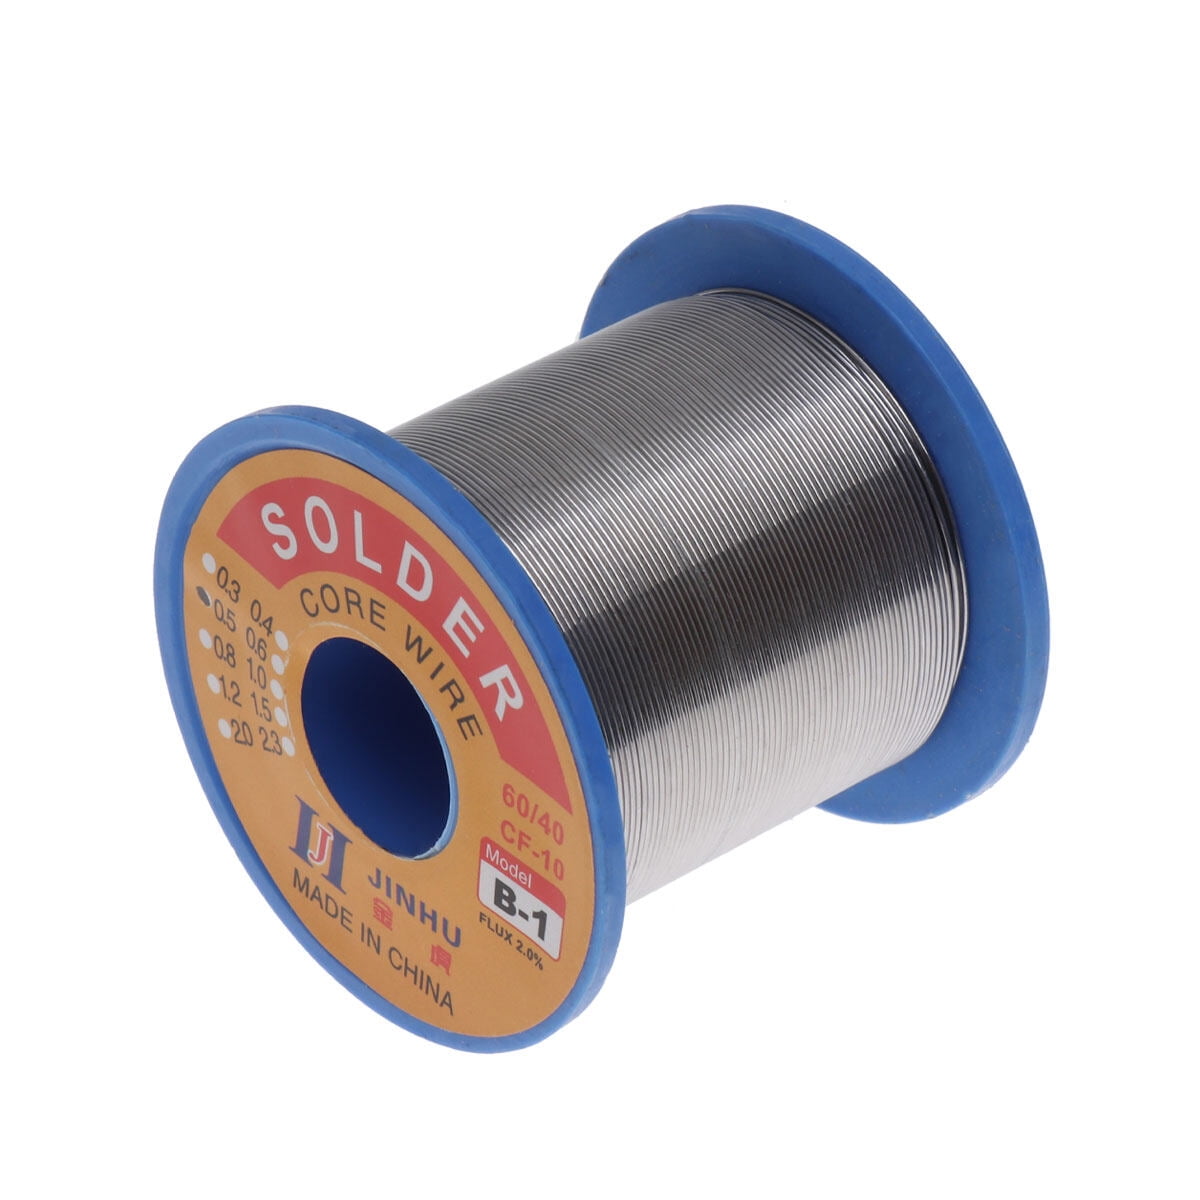 16 oz Roll of Choice 60/40 Solder is 60 percent TIN Not for jewelry.  Perfect for all other soldering. Boxes, windows, etc